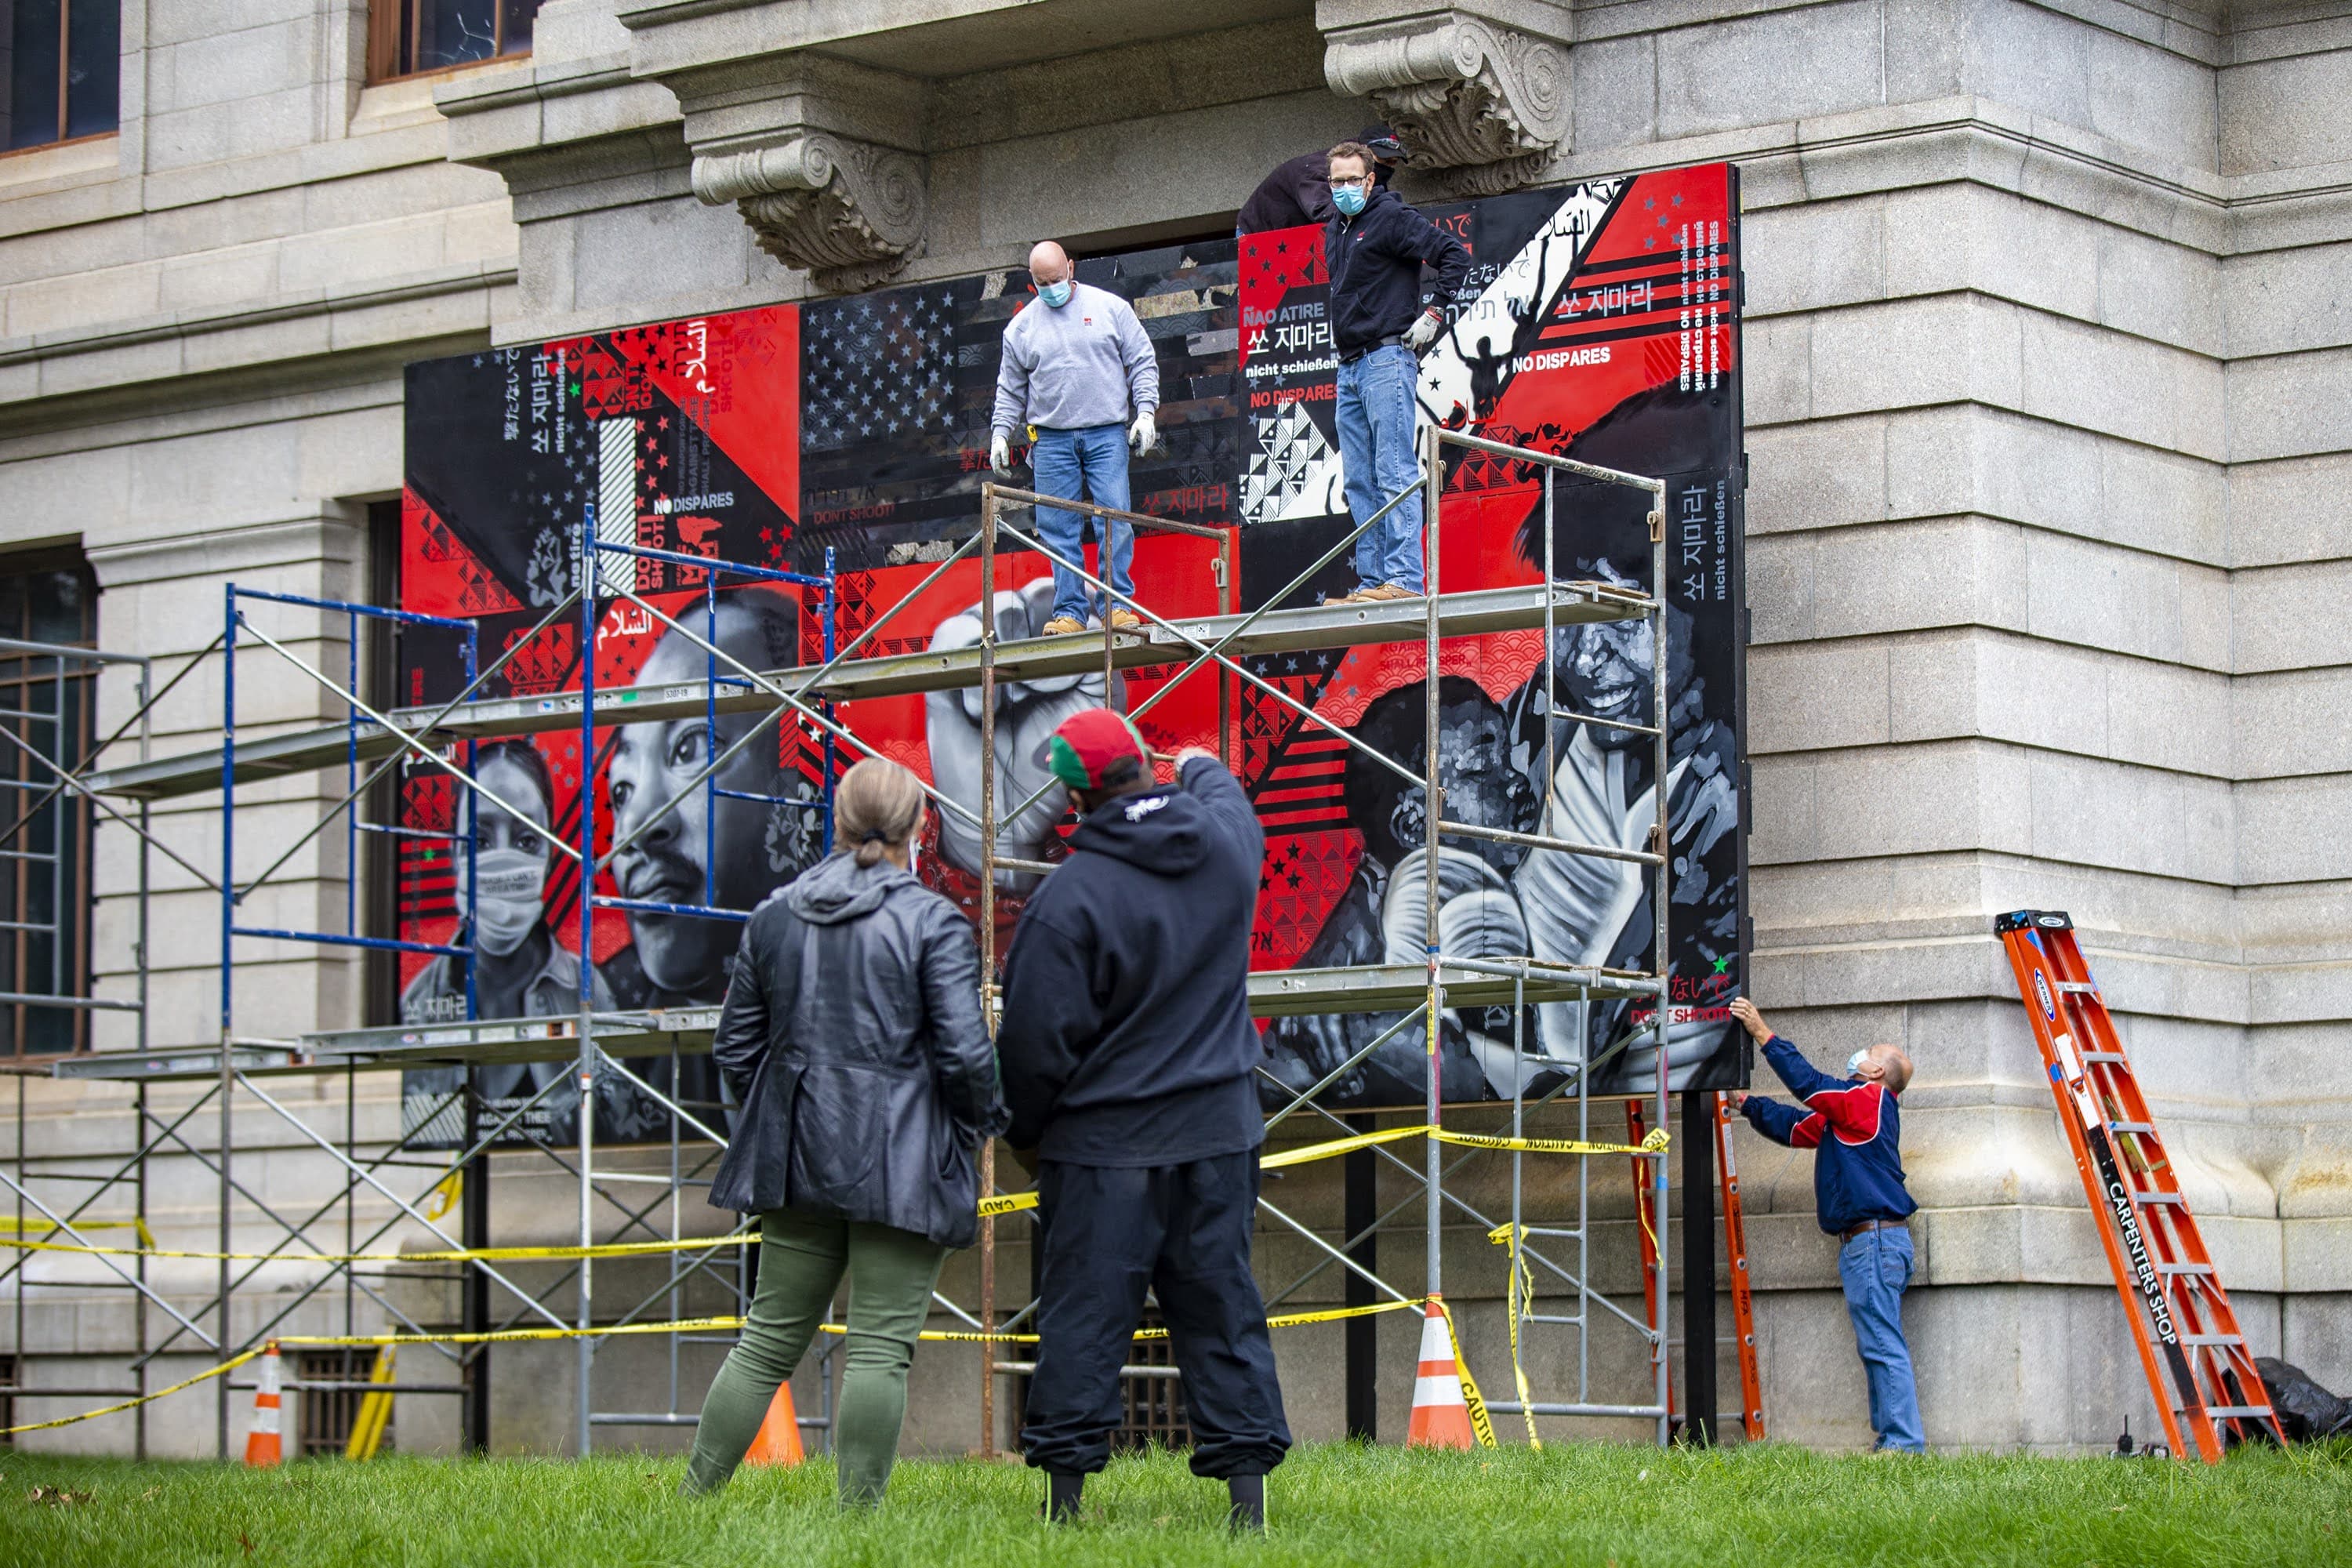 Museum of Fine Arts’ Makeeba McCreary and artist Problak Gibbs oversee the installation “No Weapon Formed Against Thee Shall Prosper” created by Cey Adams, Sophia Dawson and Victor “Marka27” Quiñonez on the museum’s Huntington Avenue lawn. (Jesse Costa/WBUR)